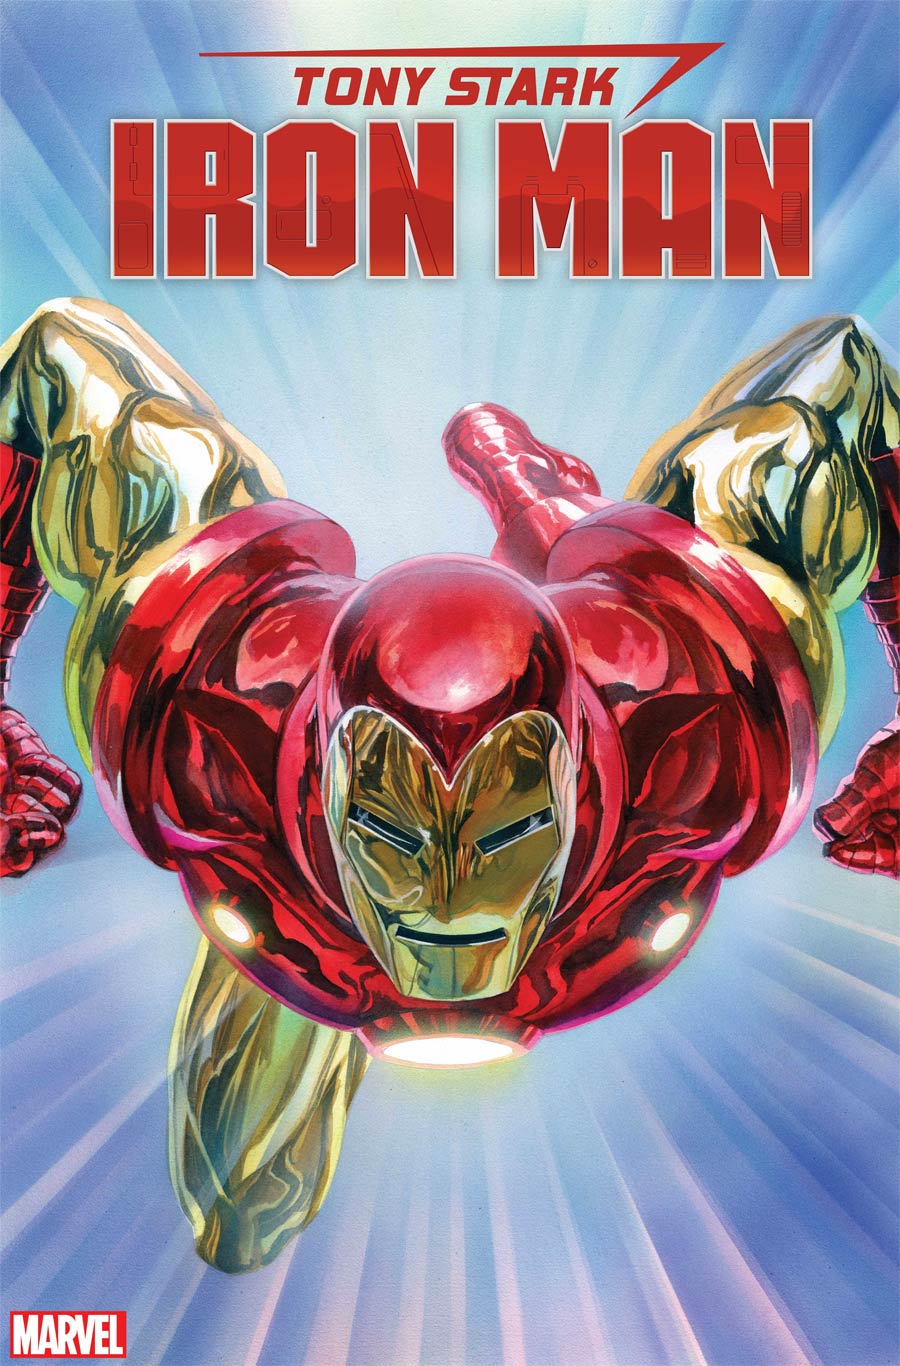 Invincible Iron Man Vol 3 #600 By Alex Ross Poster